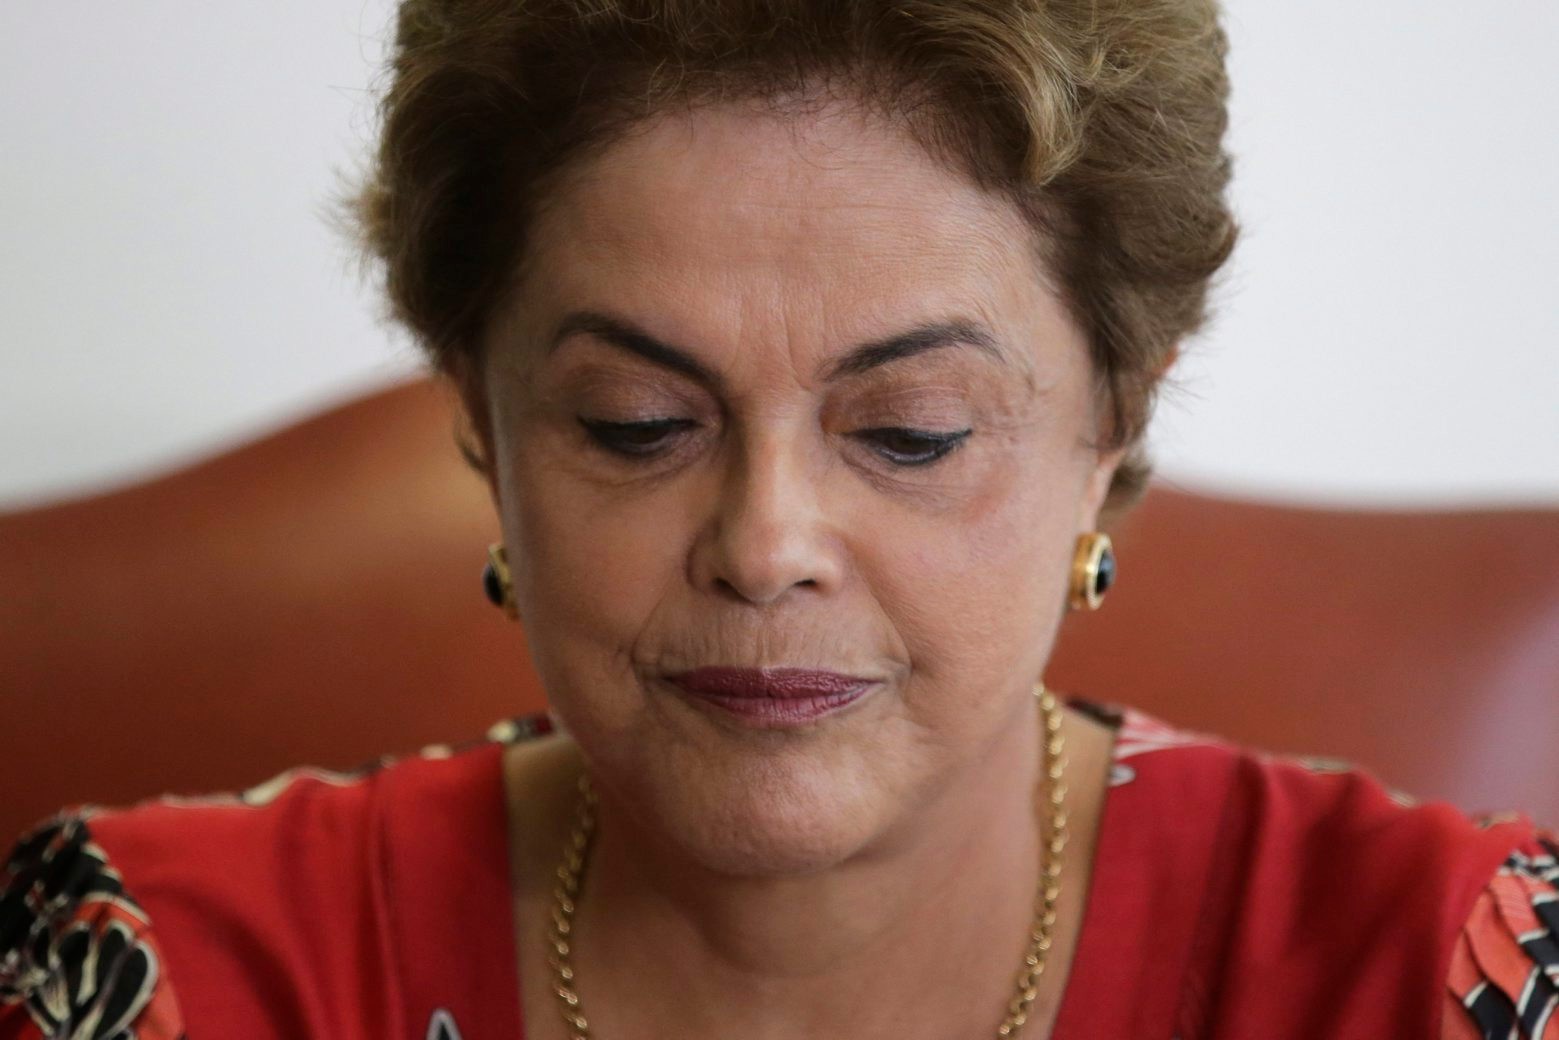 Brazil's President Dilma Rousseff attends a meeting with Brazilian Ambassador Roberto Azevedo, director general of the World Trade Organization, at the Planalto Presidential Palace, in Brasilia, Tuesday, March 29, 2016. Former Brazilian President Luiz Inacio Lula da Silva said Monday that he believes Rousseff, his embattled successor and protege, can survive mounting pressure in Congress for her impeachment. Rousseff recently appointed Silva as her chief of staff in a much-discussed move that still must be confirmed by Brazil's top court. (AP Photo/Eraldo Peres) Brazil Political Crisis